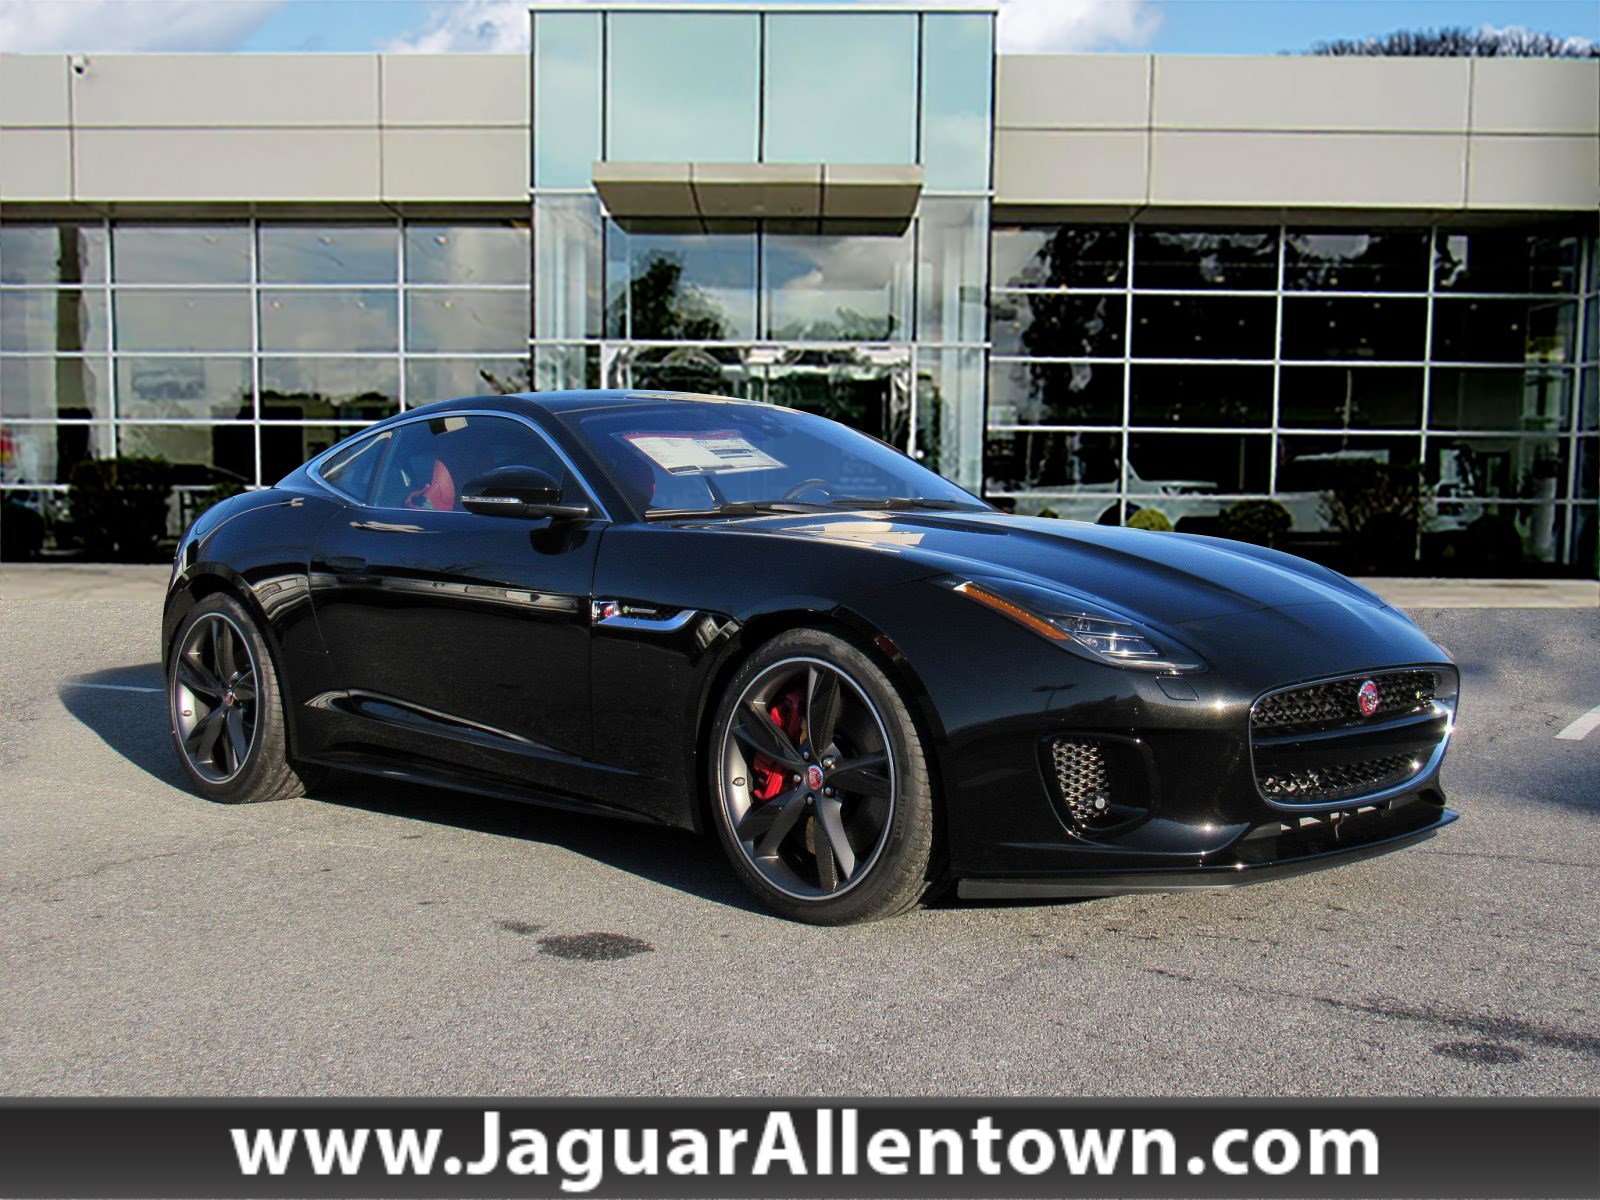 New 2019 Jaguar F-TYPE R-Dynamic Coupe in Allentown #10194 ...